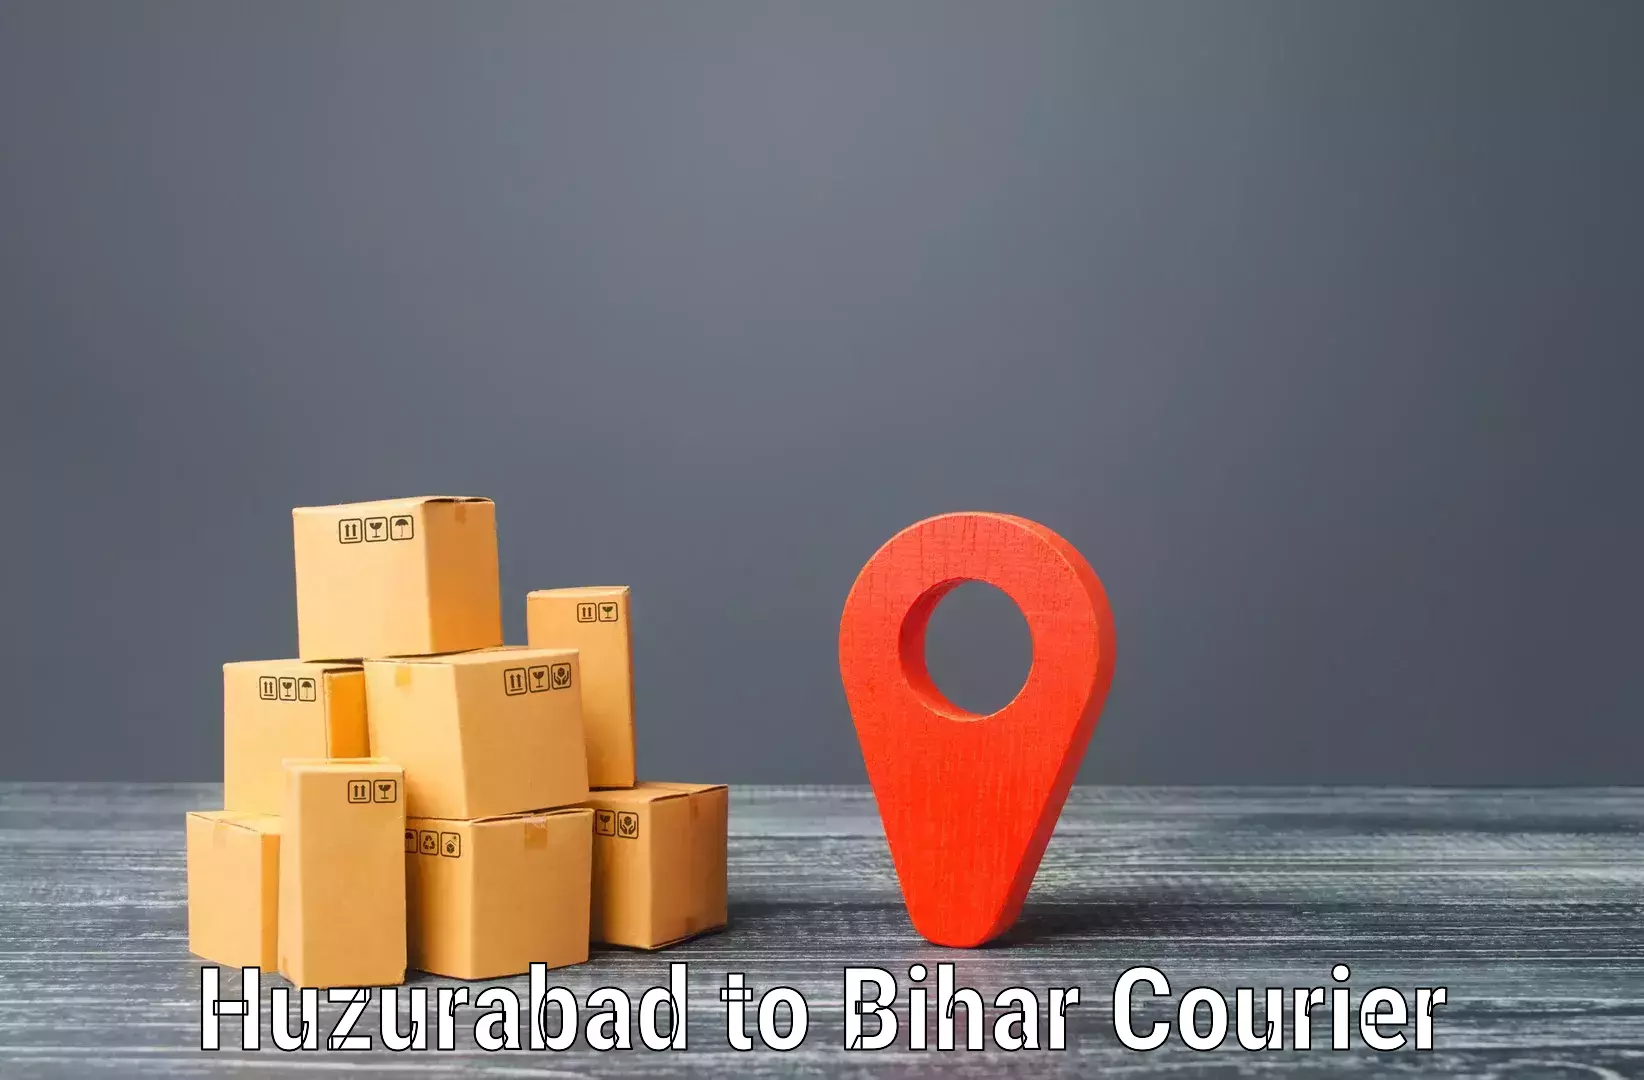 Residential courier service Huzurabad to Fatwah